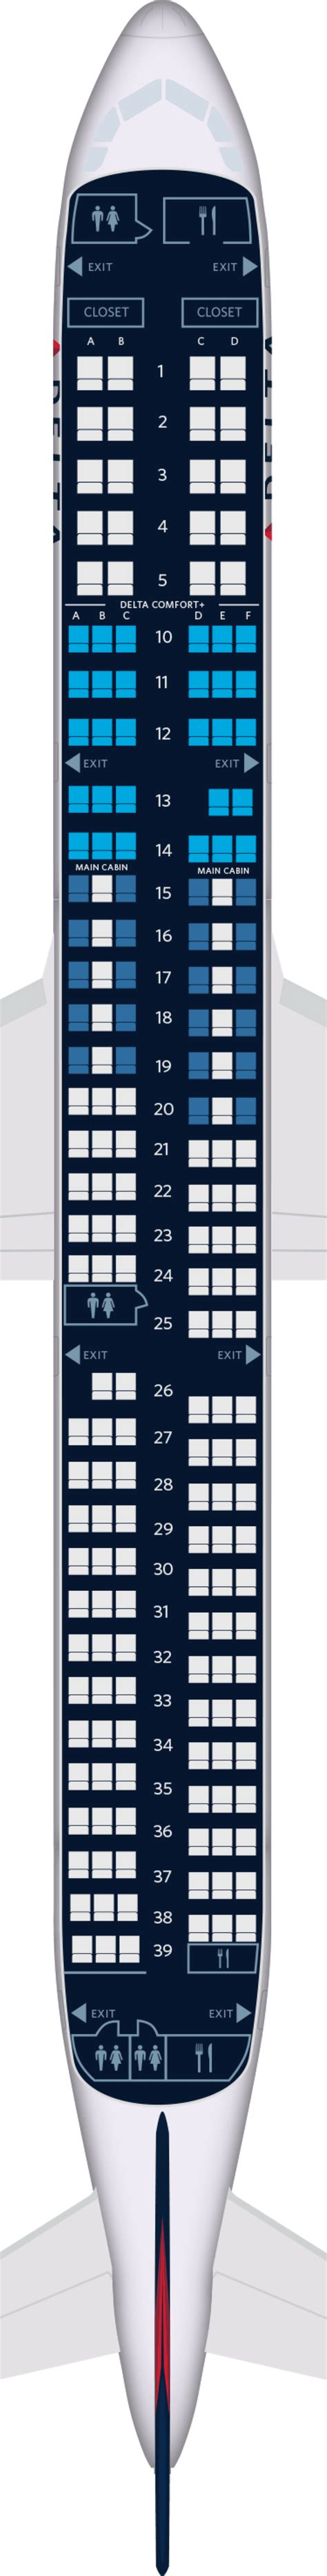 Hawaiian Airlines Seat Map Airbus A321 Awesome Home